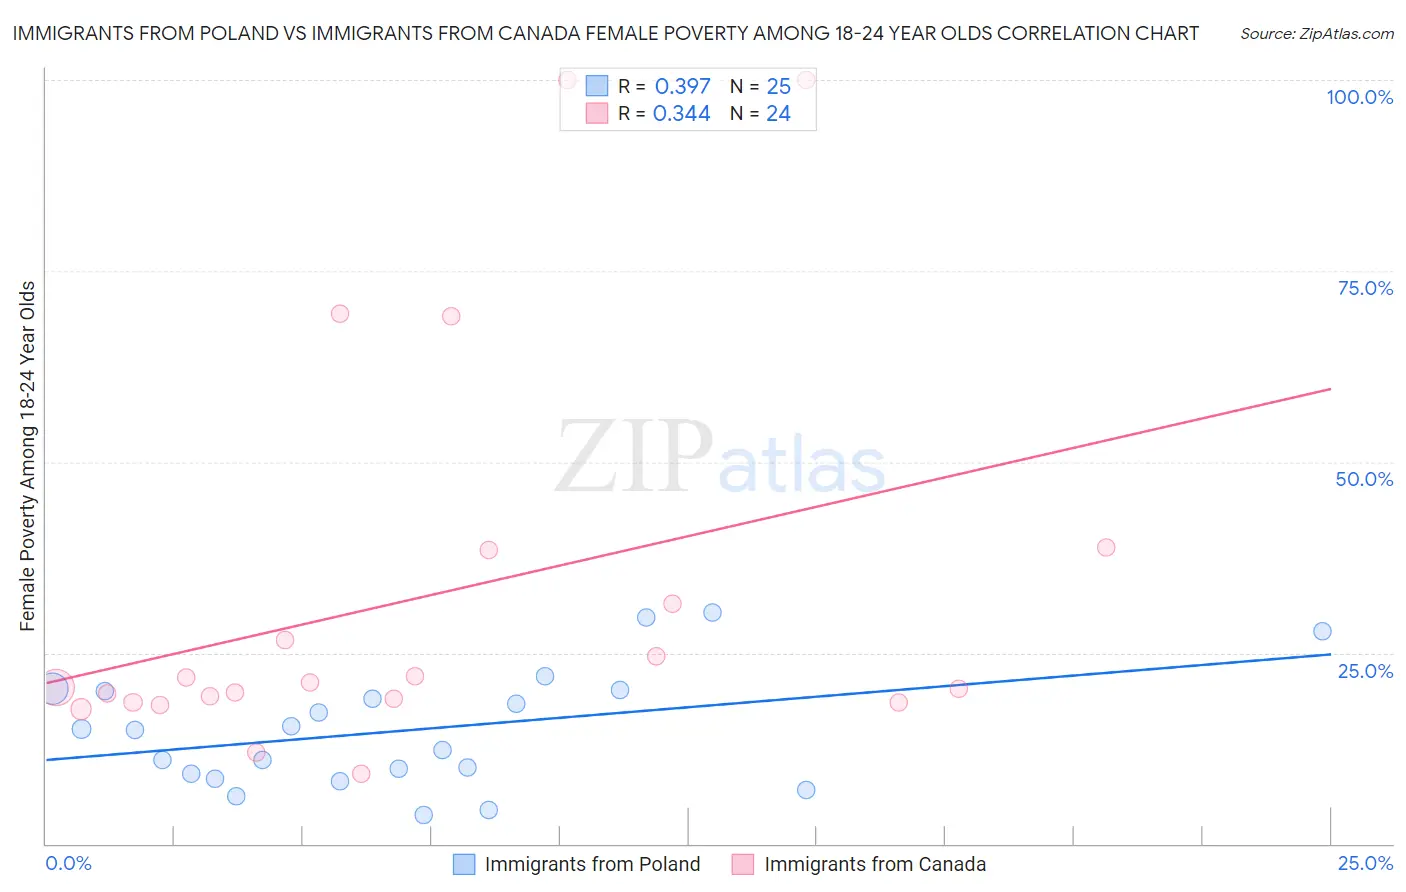 Immigrants from Poland vs Immigrants from Canada Female Poverty Among 18-24 Year Olds